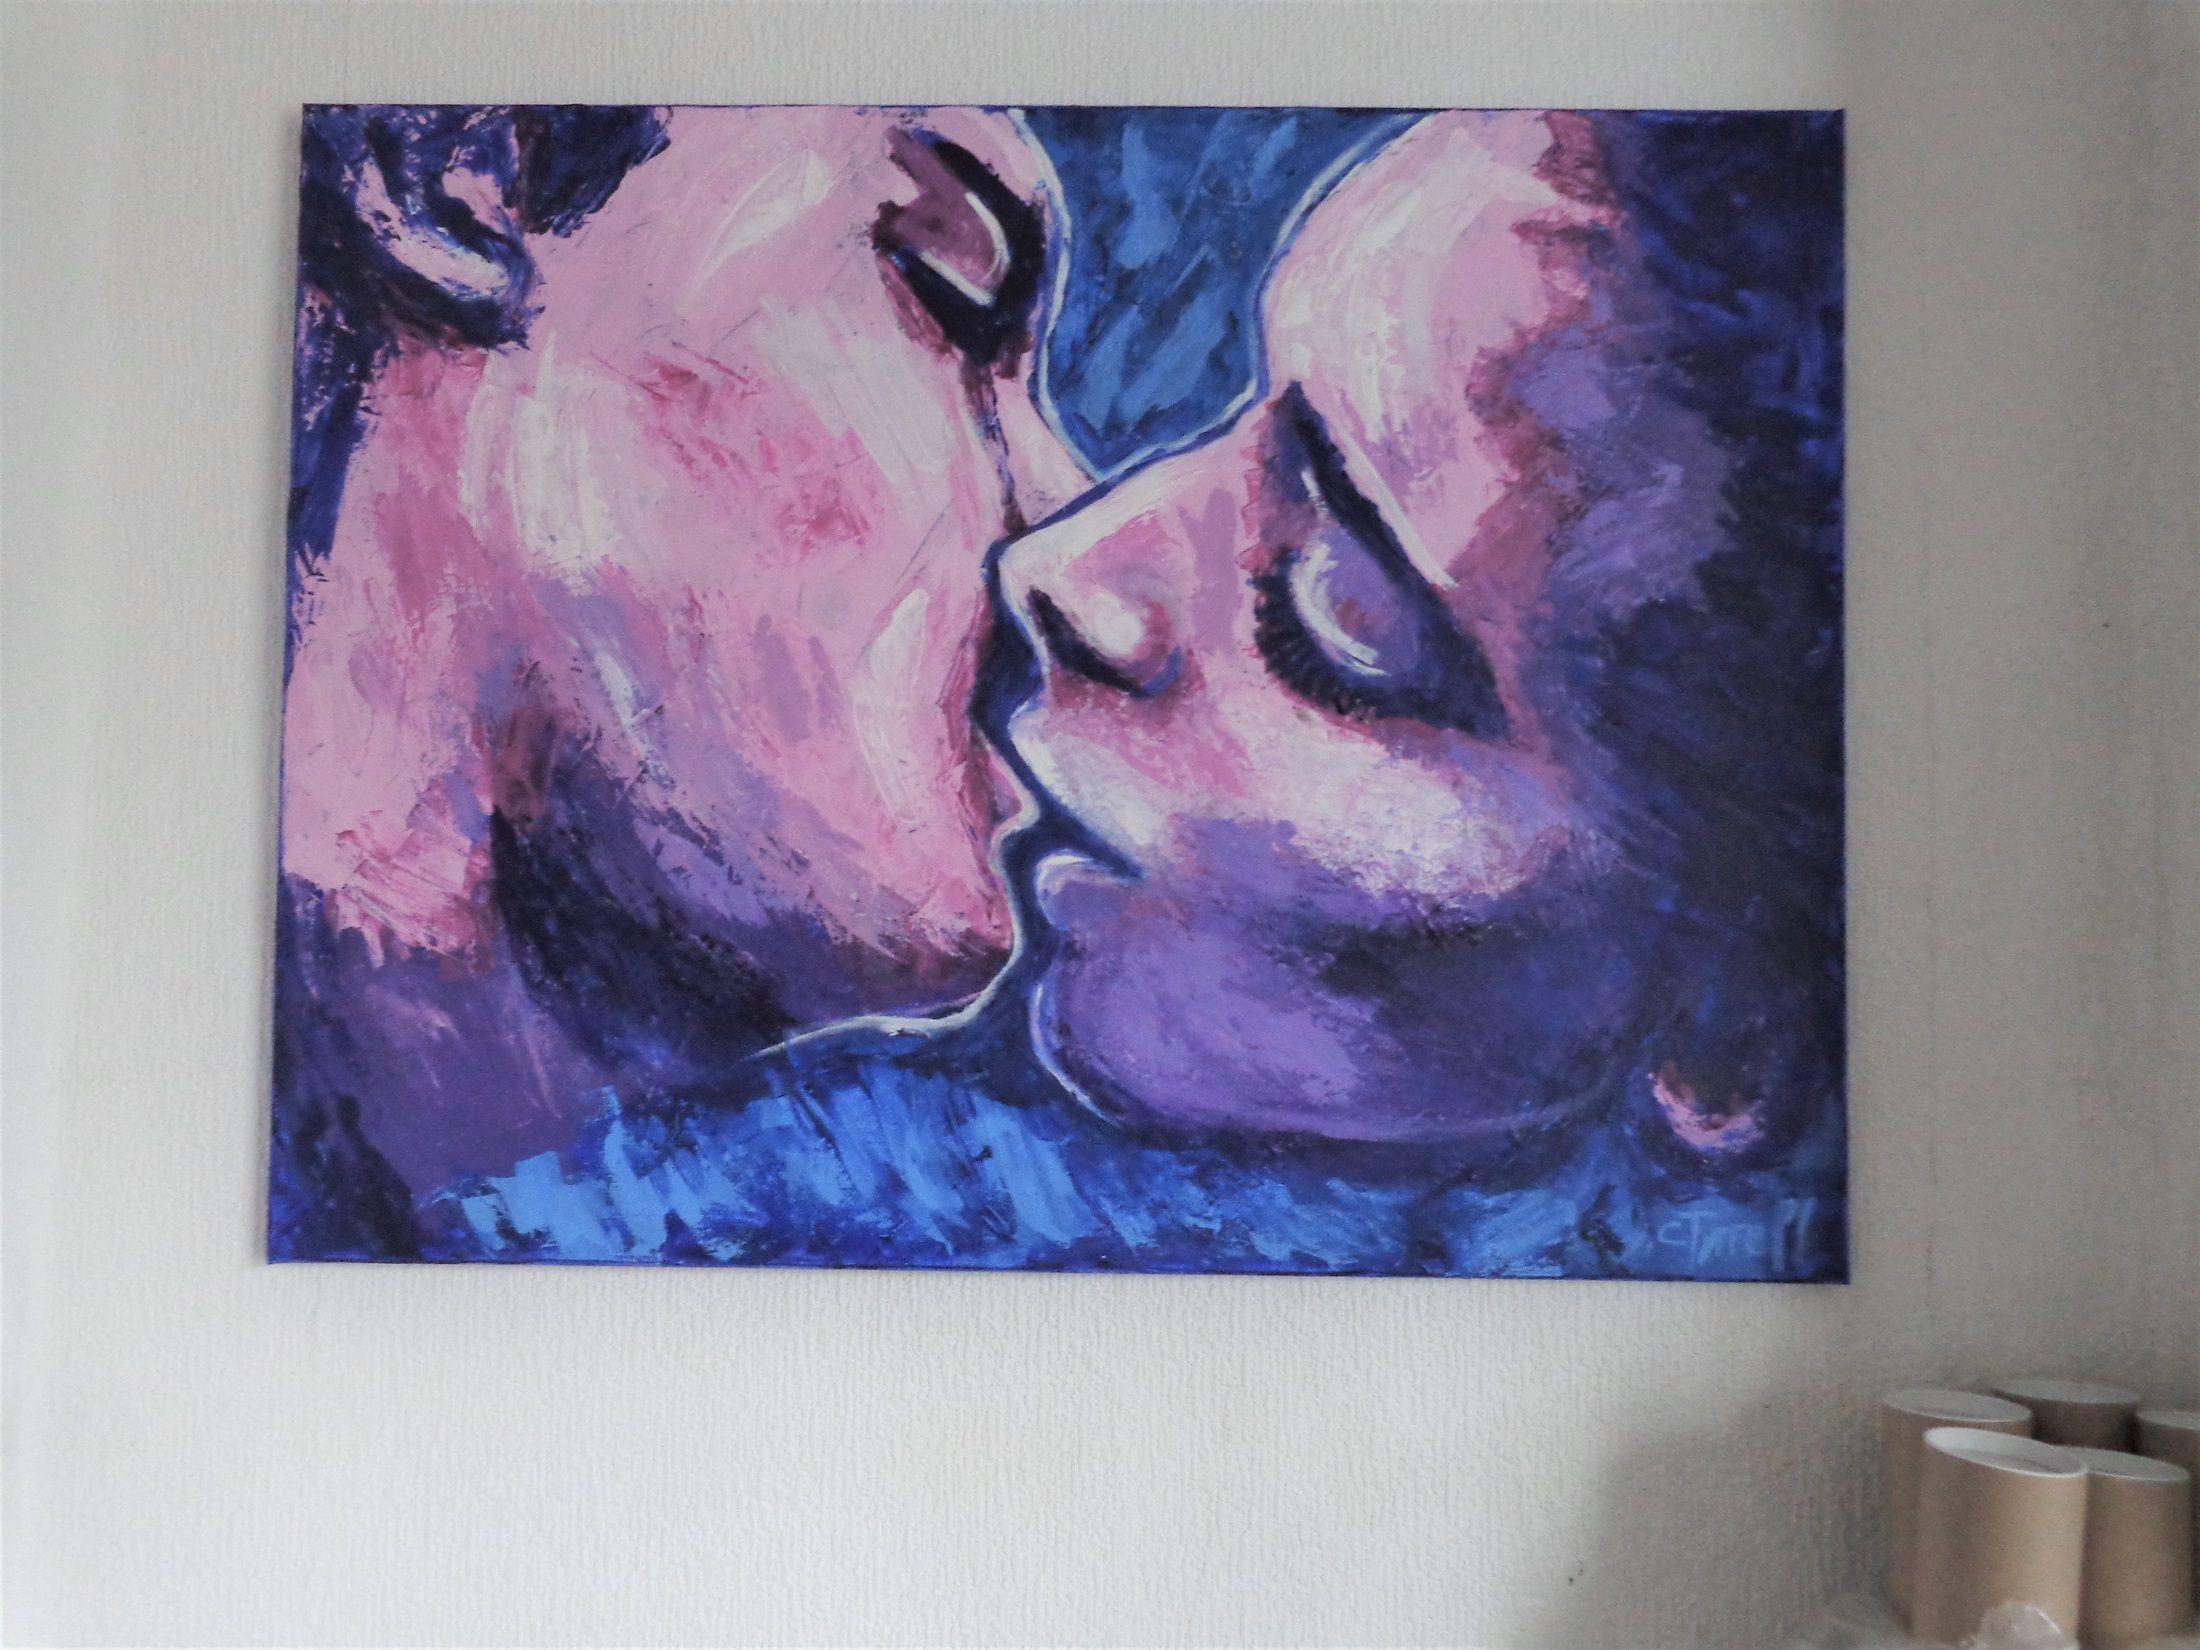 Original expressionist figurative acrylics painting on stretched canvas, painted edges and ready to hang. Frame is optional. Part of the series of Lovers portraits, romantic image of a man and woman kissing. Colourful and textured. Use of pink,